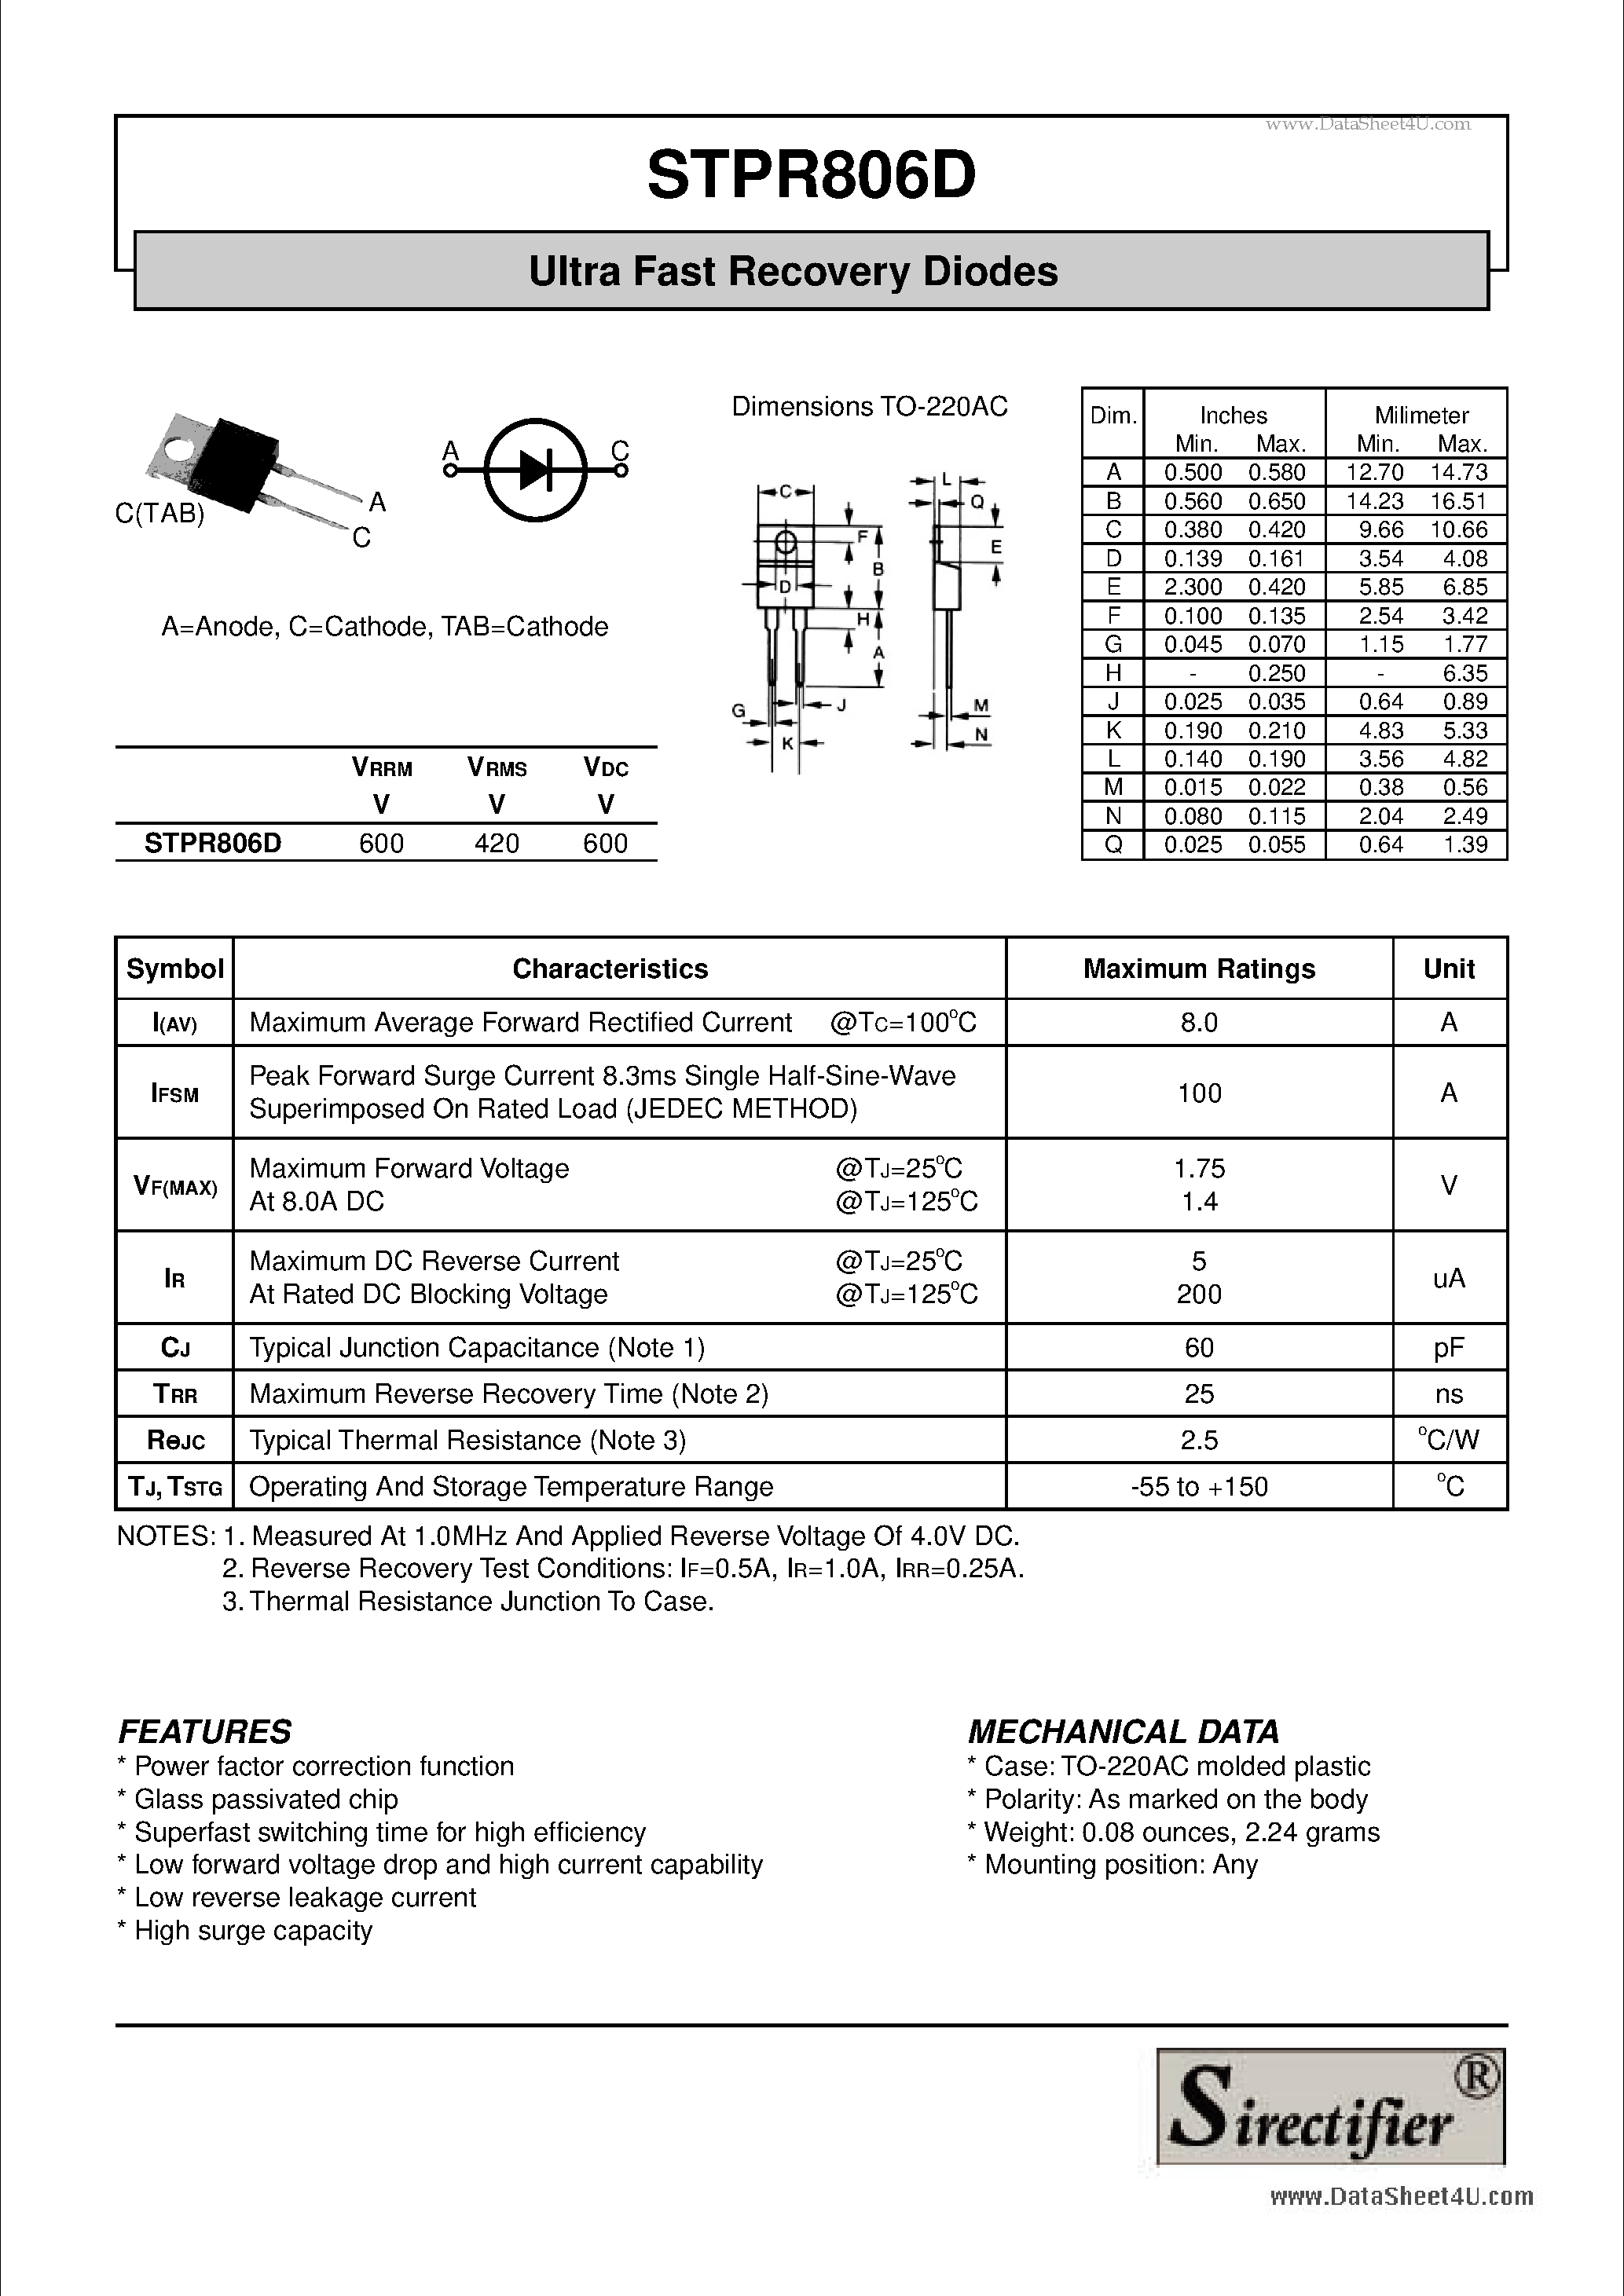 Даташит STPR806D - Ultra Fast Recovery Diodes страница 1